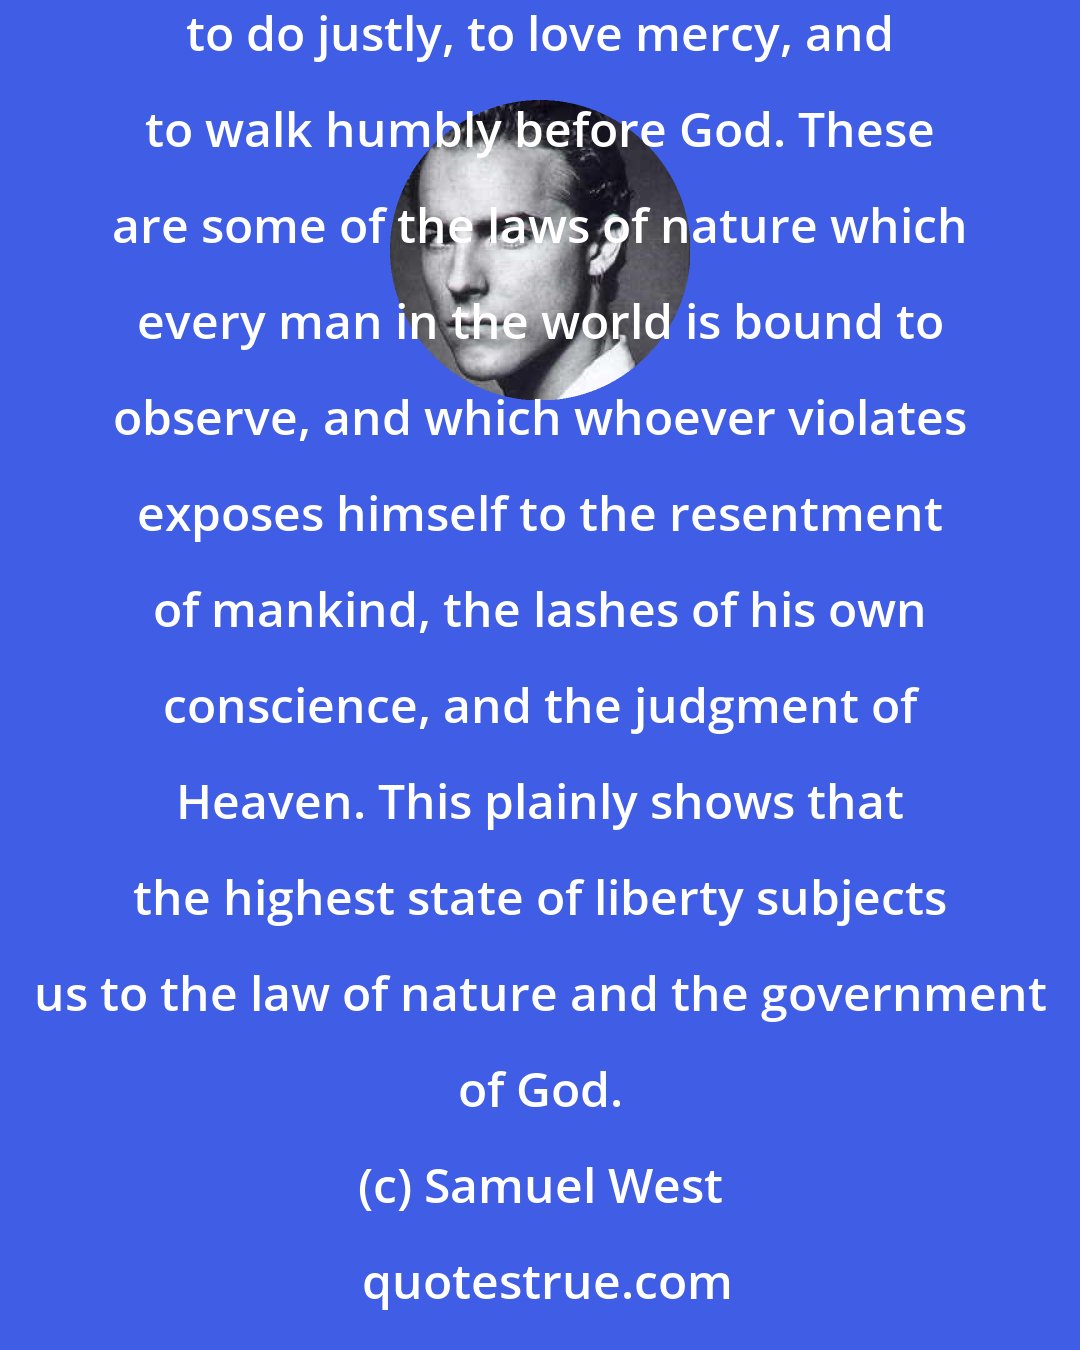 Samuel West: It is our duty to endeavor always to promote the general good; to do to all as we would be willing to be done by were we in their circumstances; to do justly, to love mercy, and to walk humbly before God. These are some of the laws of nature which every man in the world is bound to observe, and which whoever violates exposes himself to the resentment of mankind, the lashes of his own conscience, and the judgment of Heaven. This plainly shows that the highest state of liberty subjects us to the law of nature and the government of God.